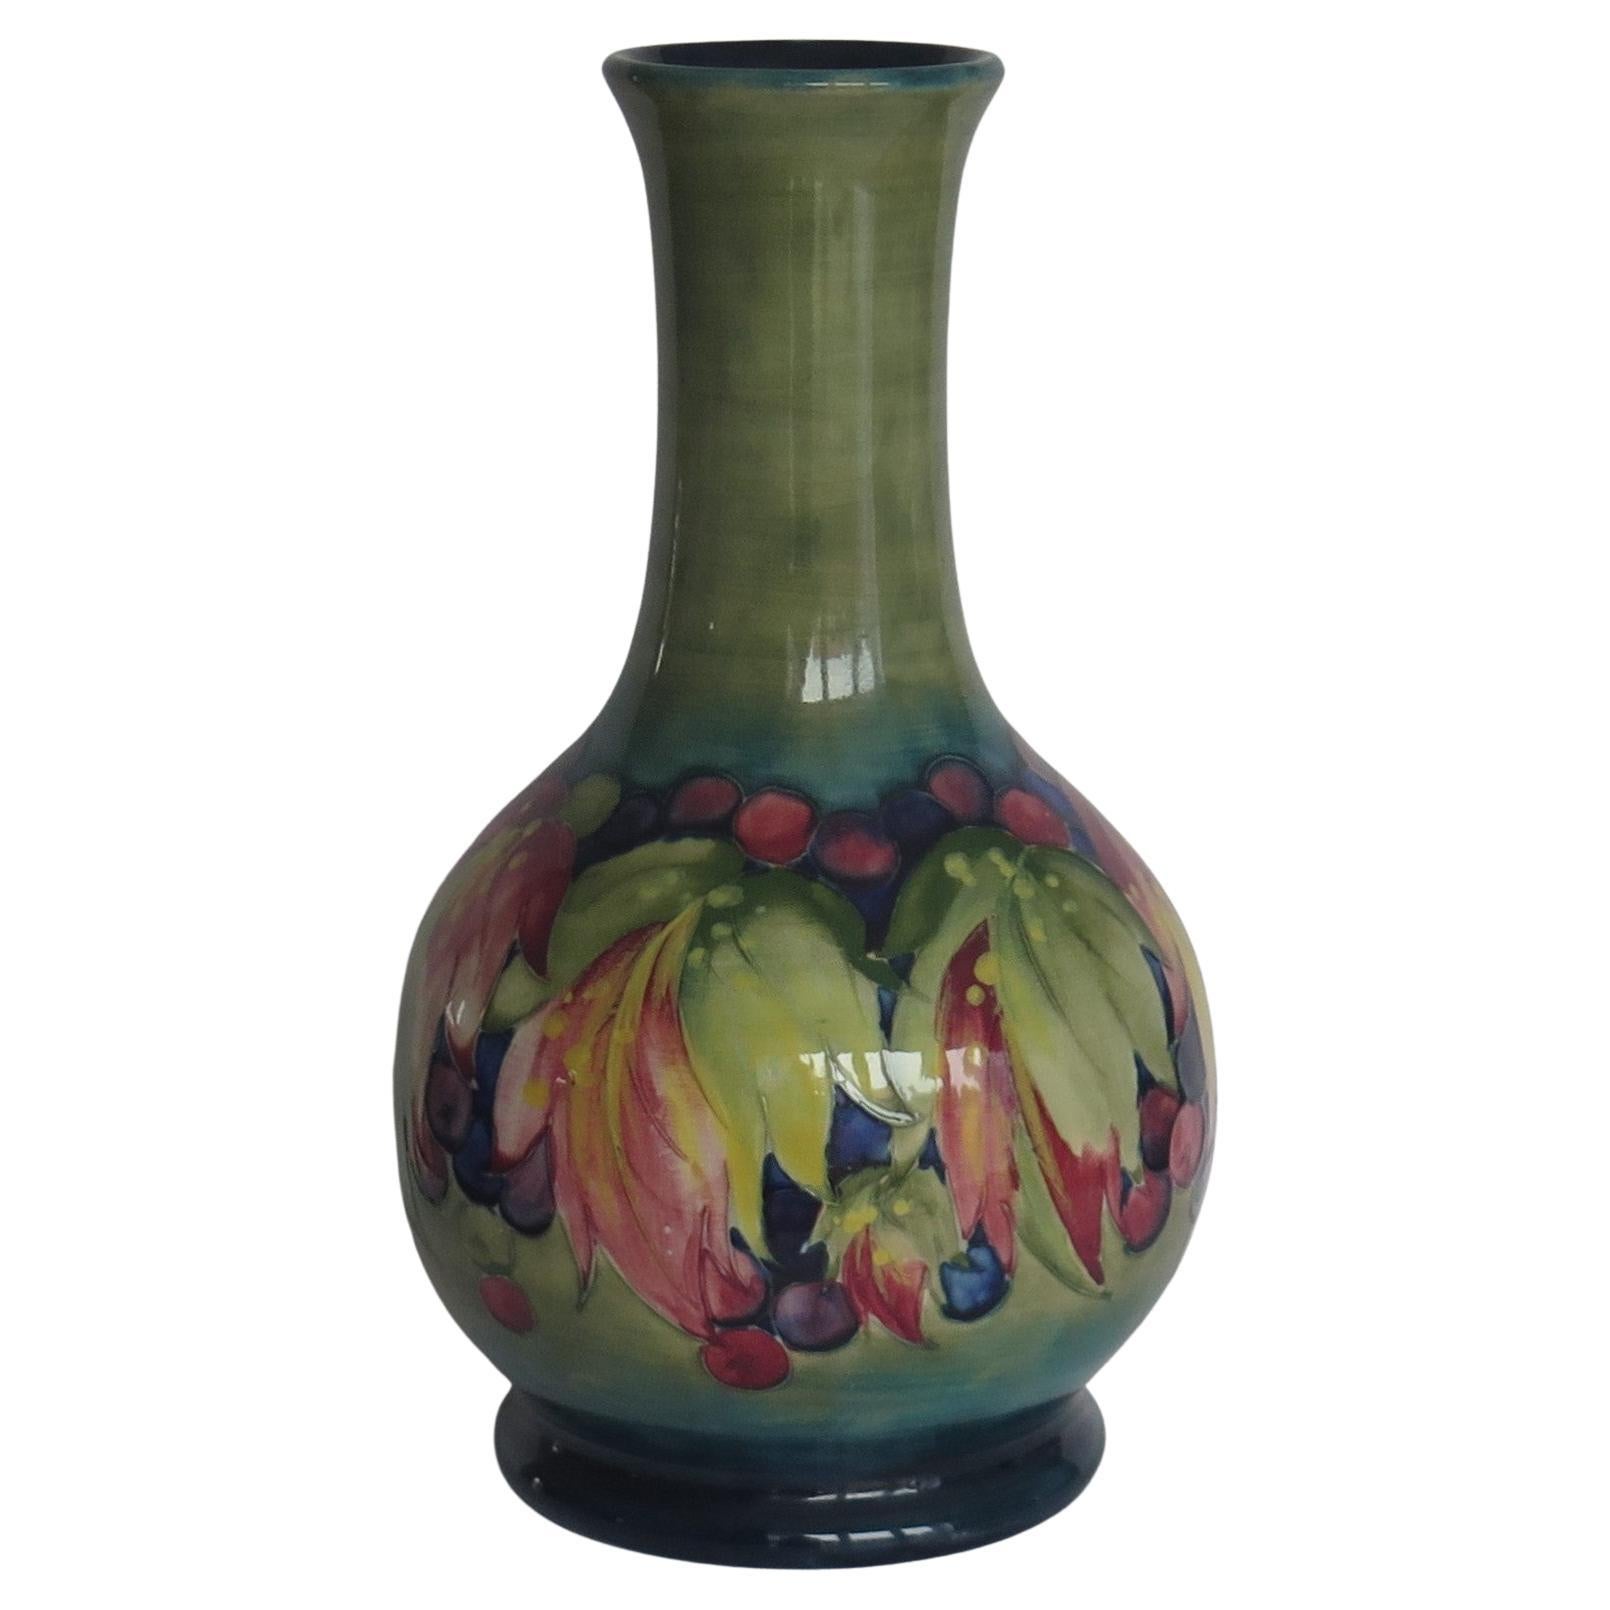 Early William Moorcroft Pottery Large Vase in Autumn Leaves Pattern, circa 1930